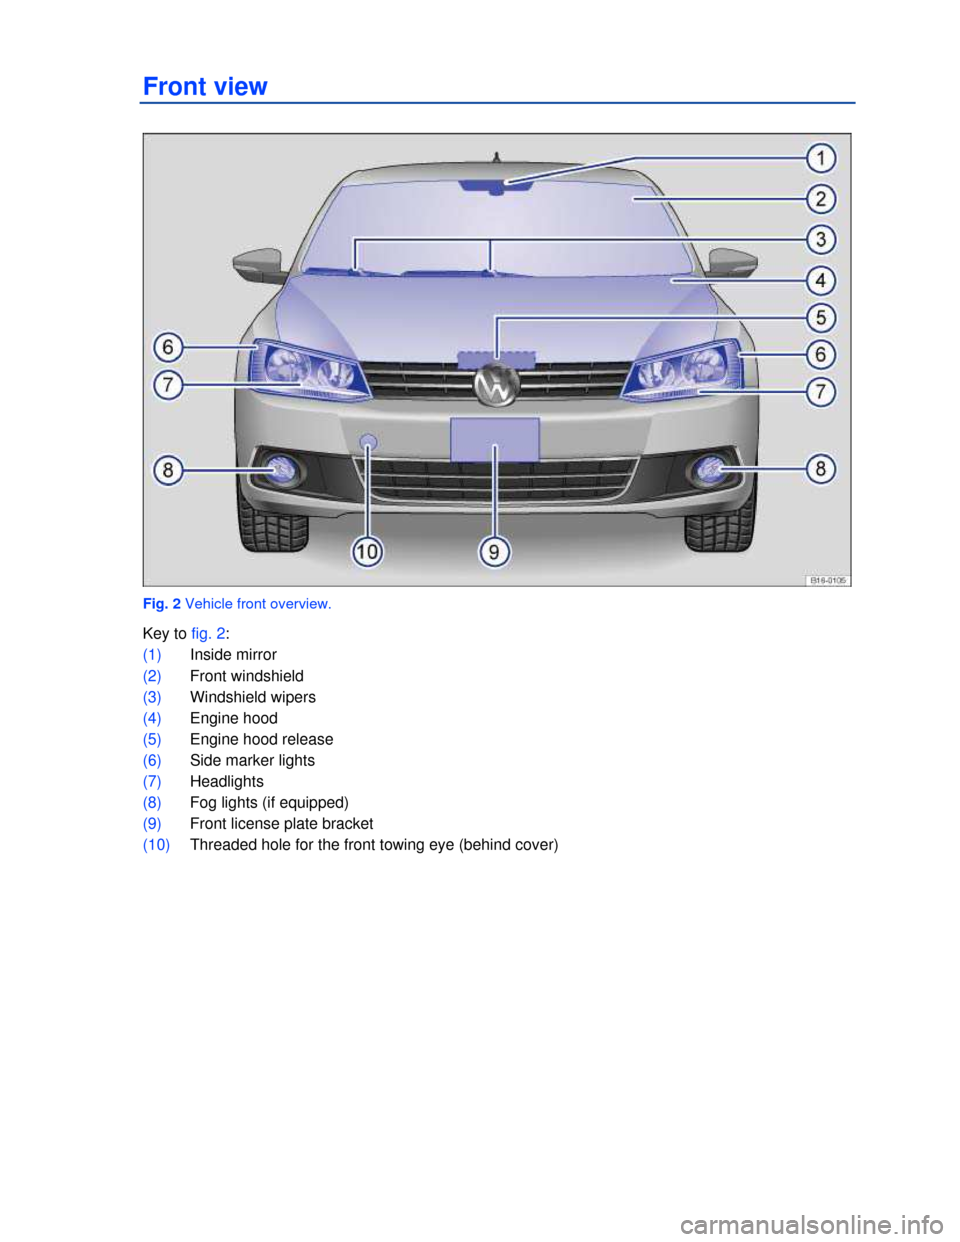 VOLKSWAGEN JETTA 2013 1B / 6.G Owners Manual  
Front view 
 
Fig. 2 Vehicle front overview. 
Key to fig. 2: 
(1) Inside mirror  
(2) Front windshield 
(3) Windshield wipers  
(4) Engine hood  
(5) Engine hood release  
(6) Side marker lights 
(7